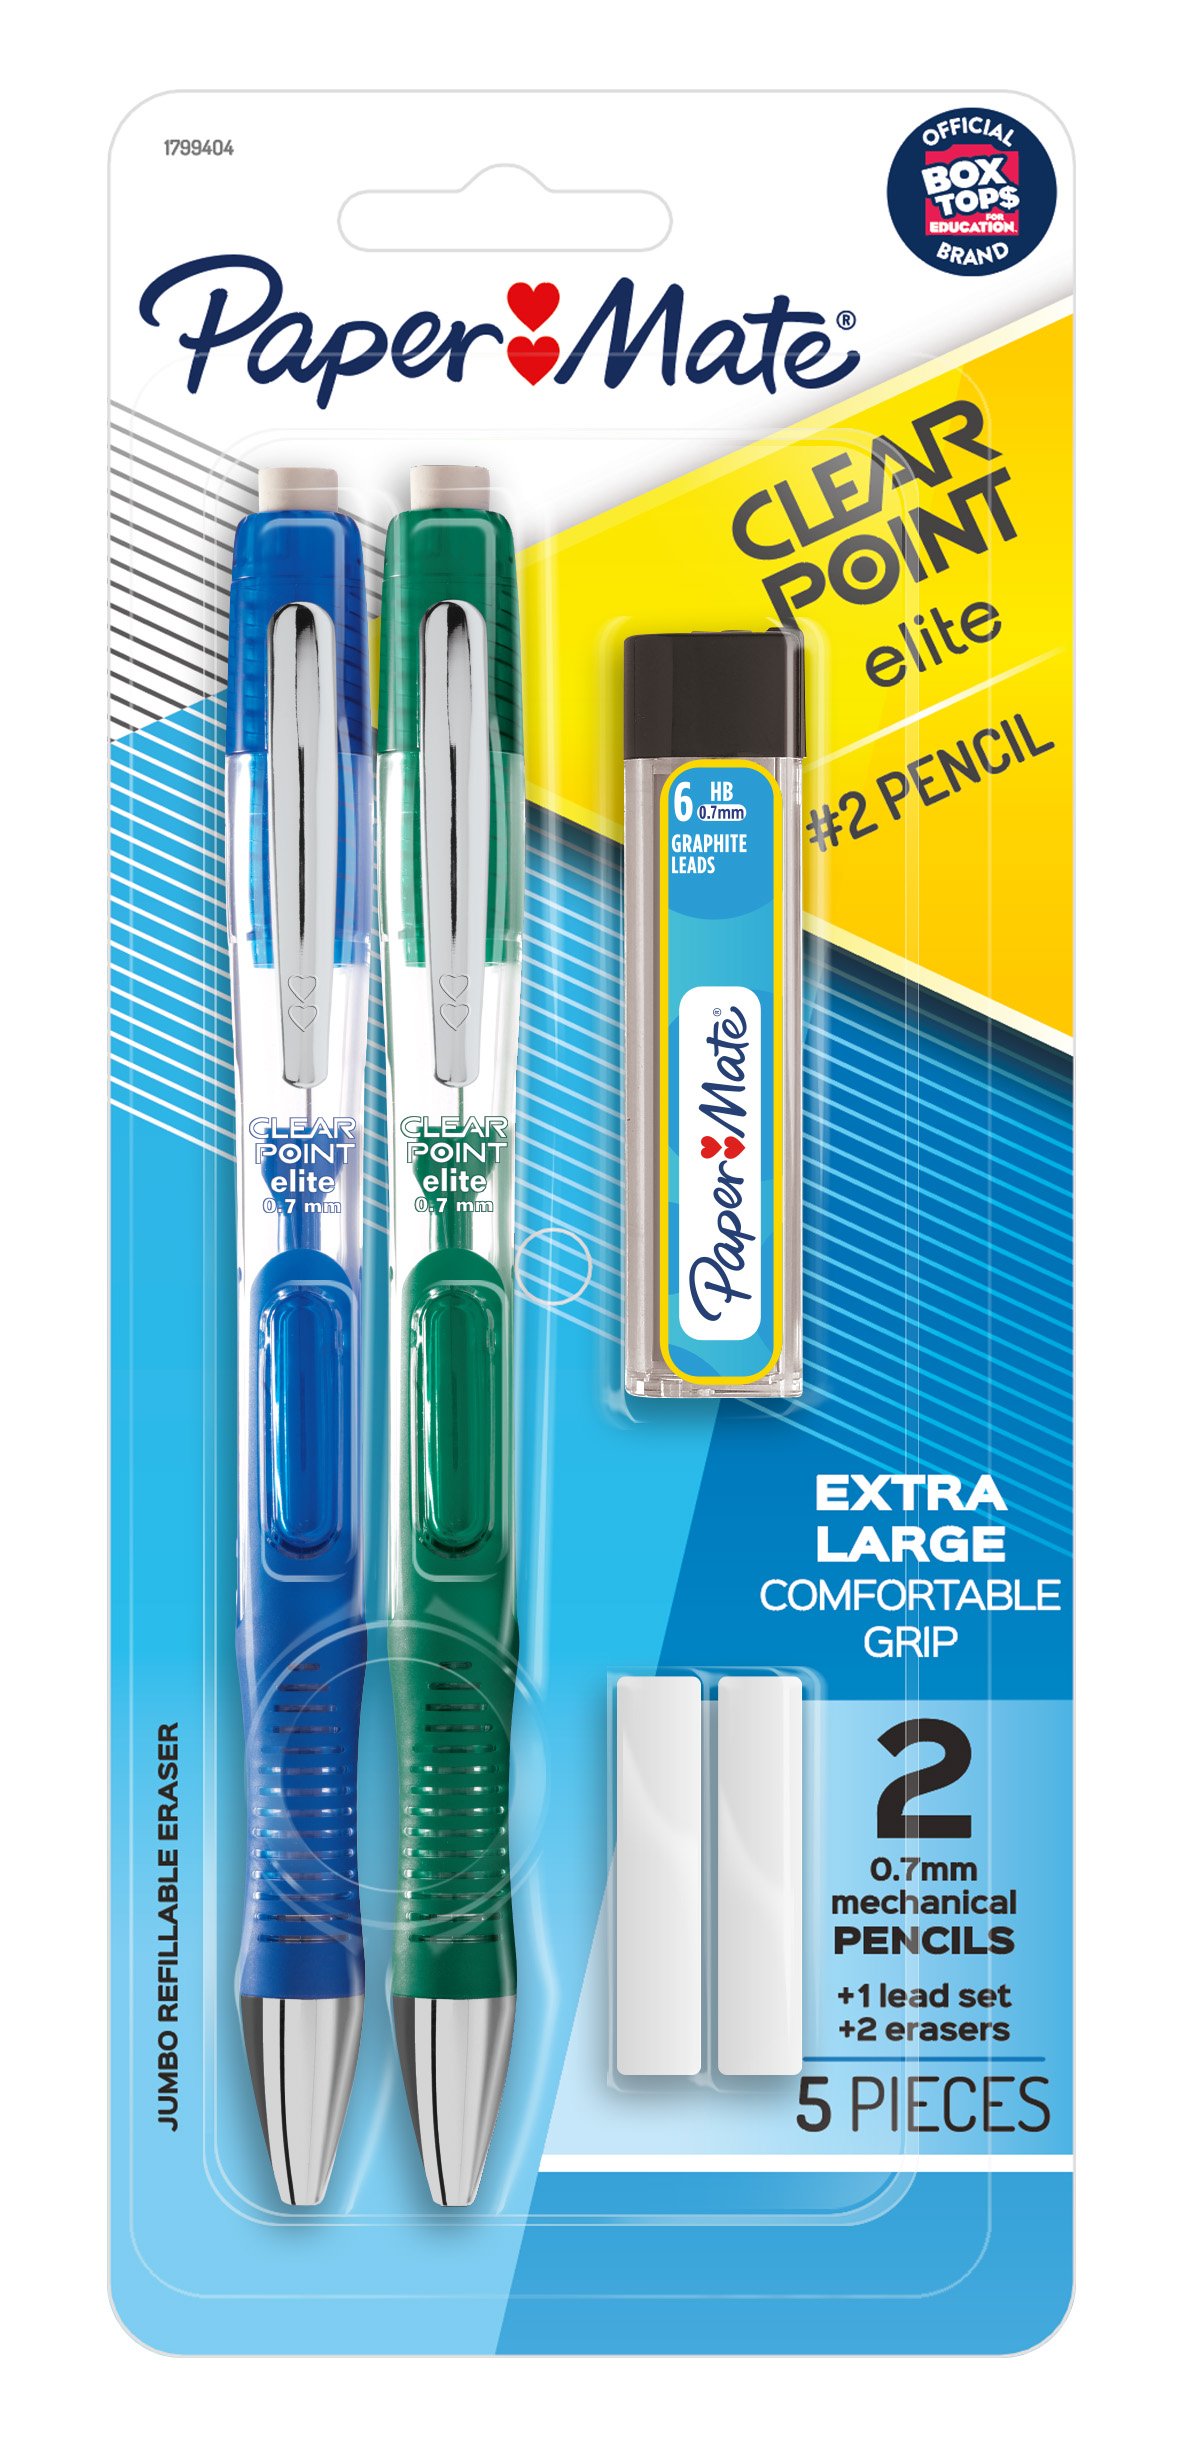 Paper Mate Clearpoint Mechanical Pencil Starter Set, 0.5 mm, 2 Pencils, 1  Lead Refill Set, 2 Erasers 